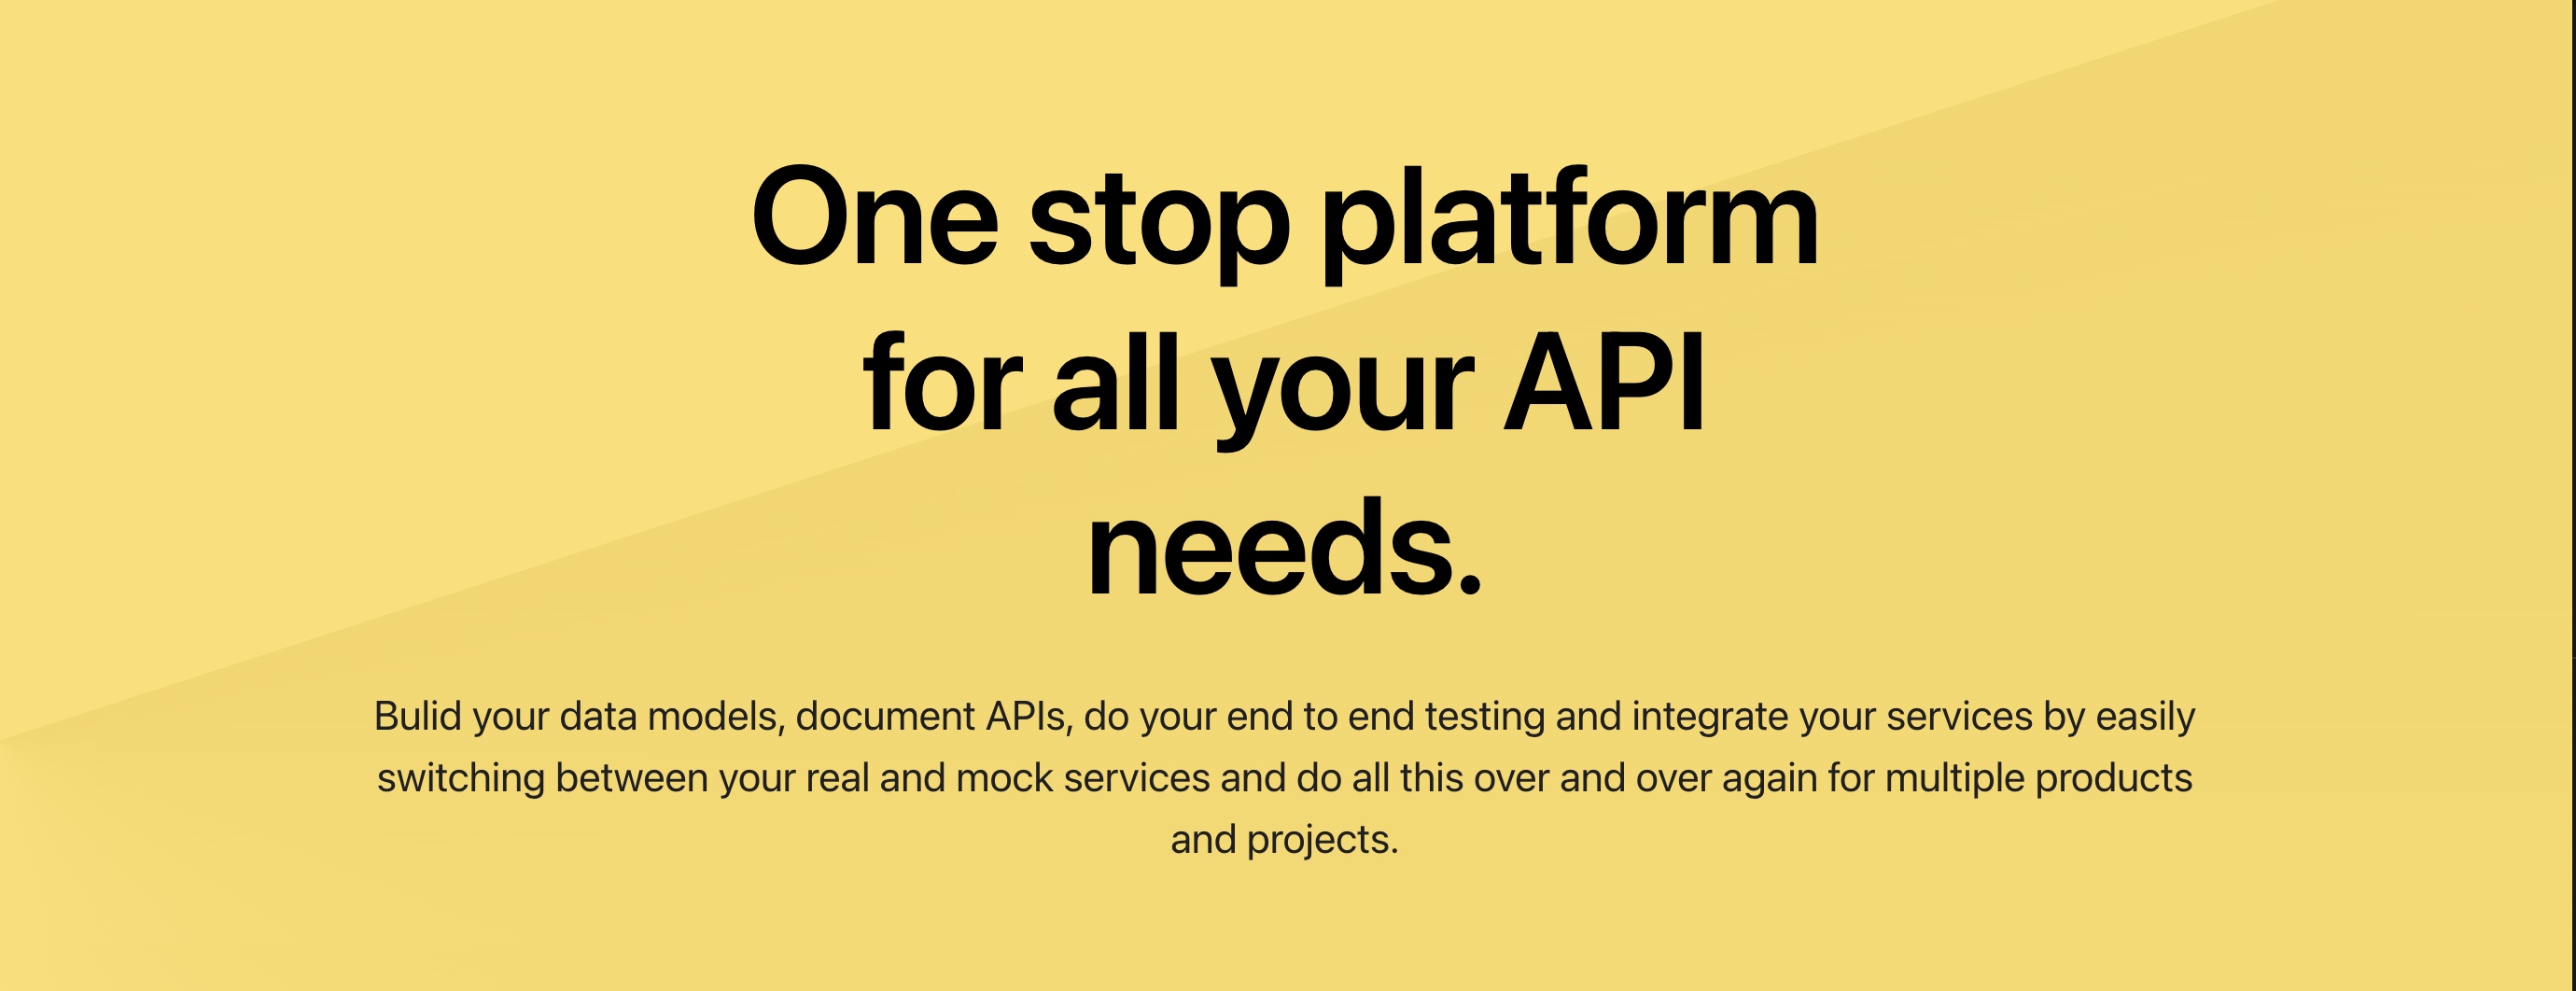 One stop platform for creating APIs, one click mock services, testing using inbuilt rest client, documentation. All this while keeping all your data with you.